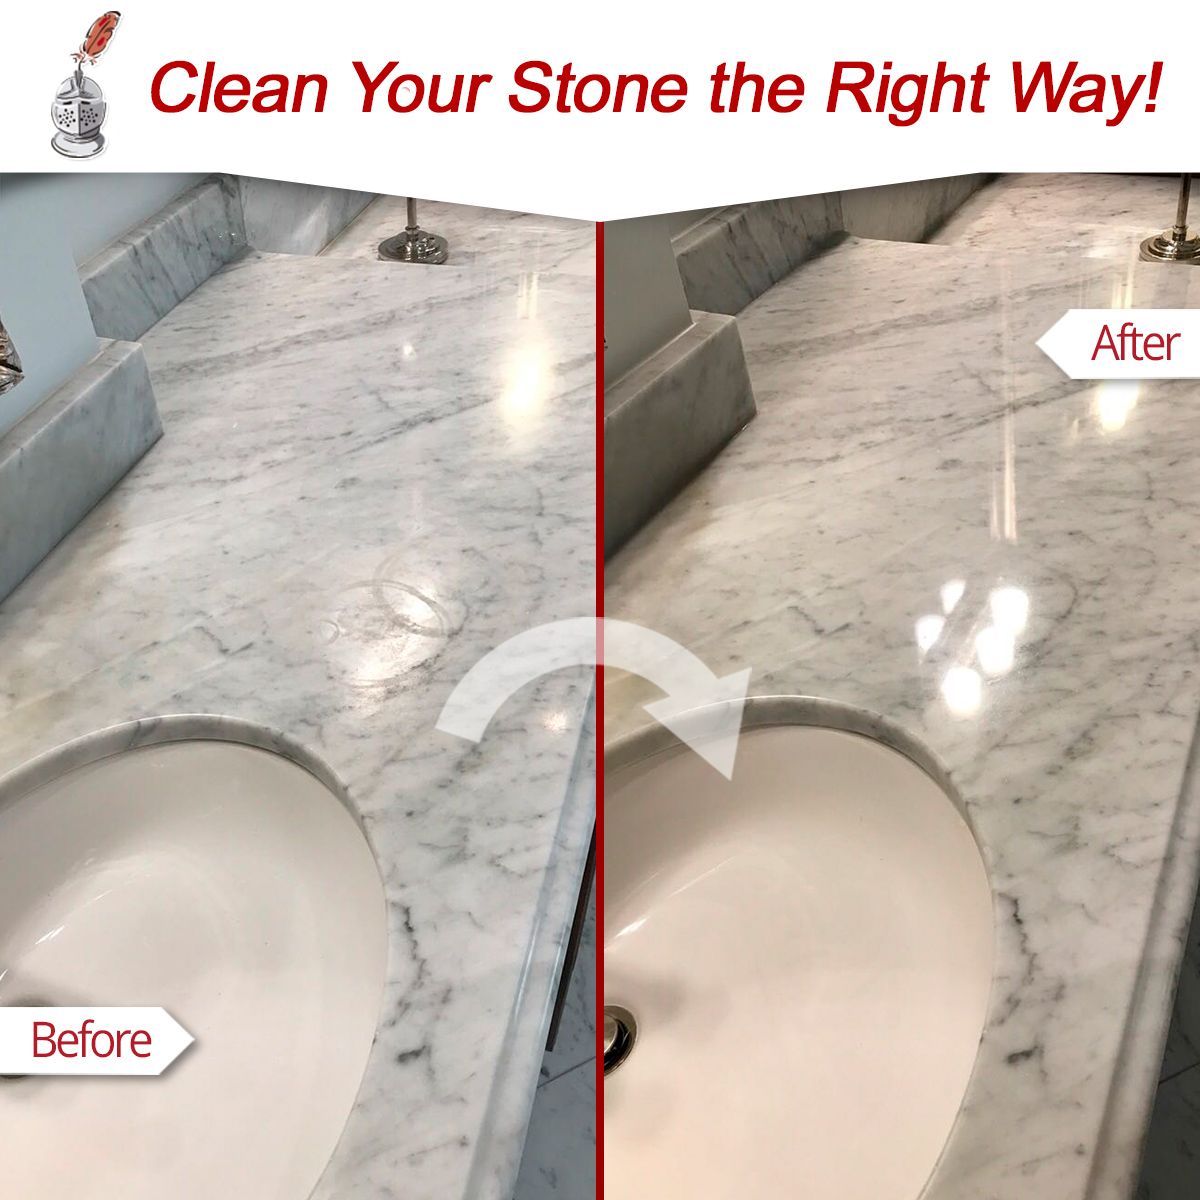 Clean Your Stone the Right Way!